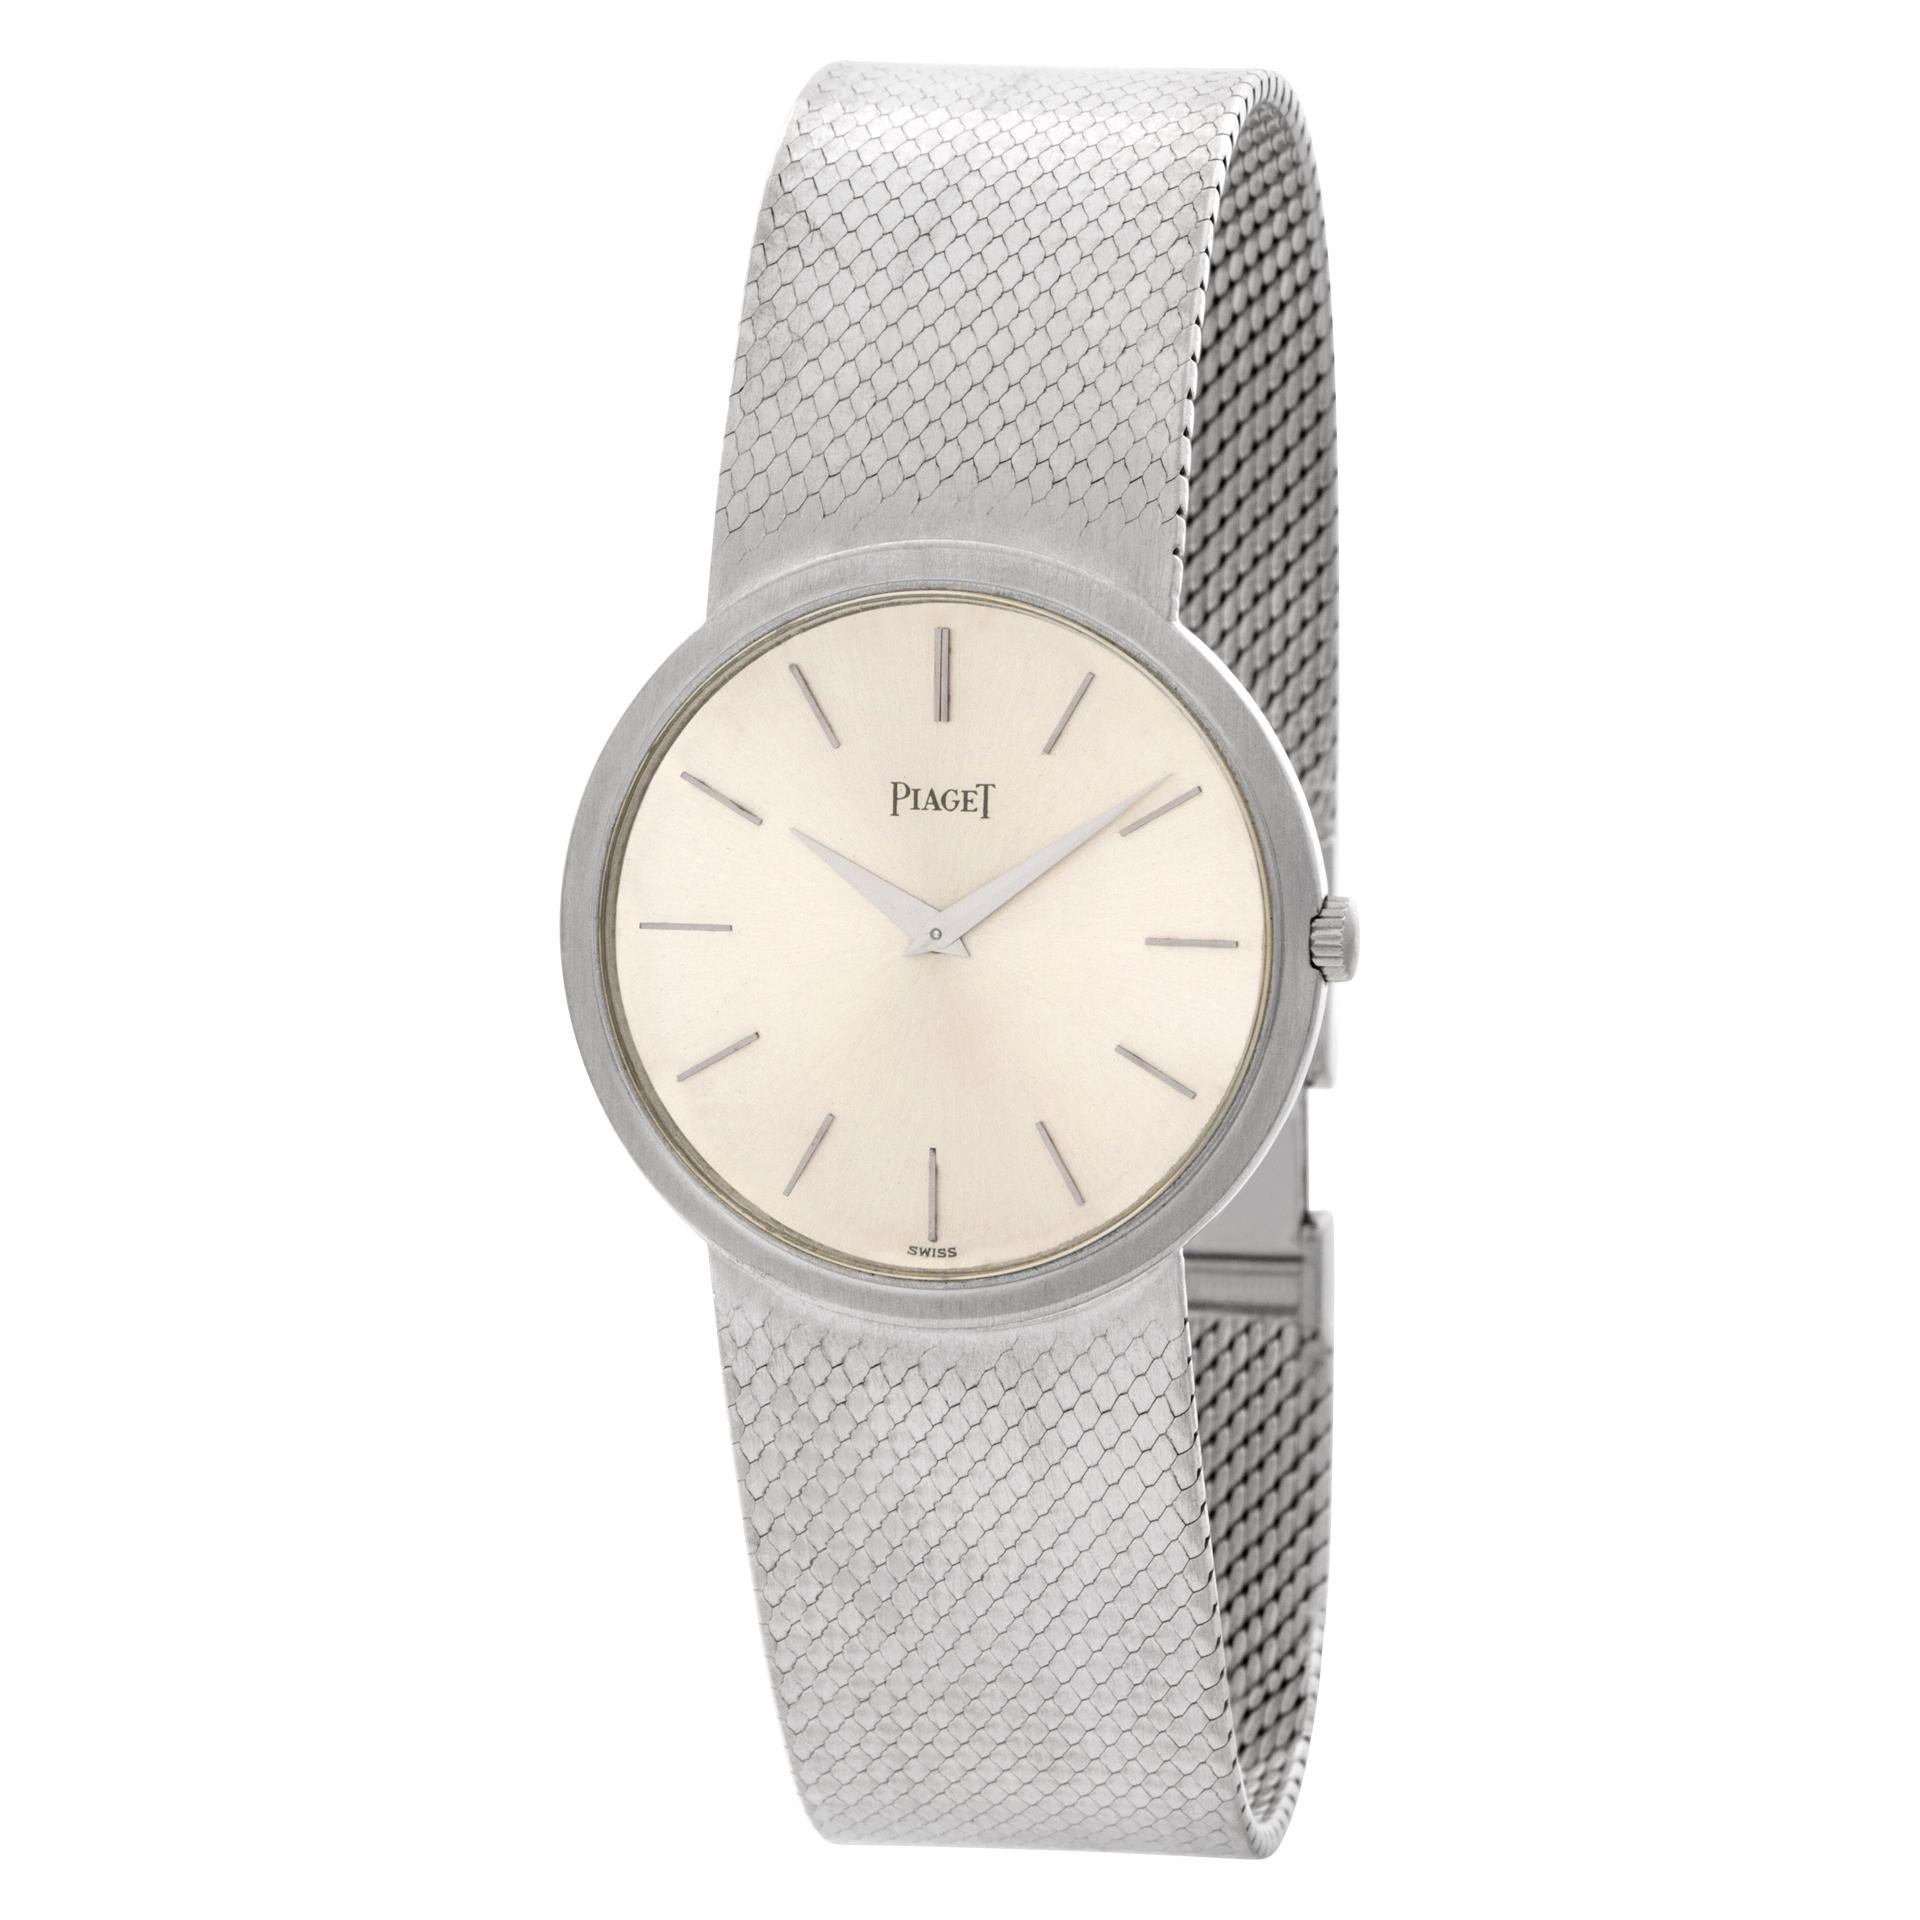 Piaget Classic in 18k white gold with Angelo D'Agusto factory original bracelet from Caracas, Venezuela. 18 jewels, Swiss ultra thin manual wind movement. With papers. Fits 7.5 inches wrist.32 mm case size. Ref 9633. Fine Pre-owned Piaget Watch. 